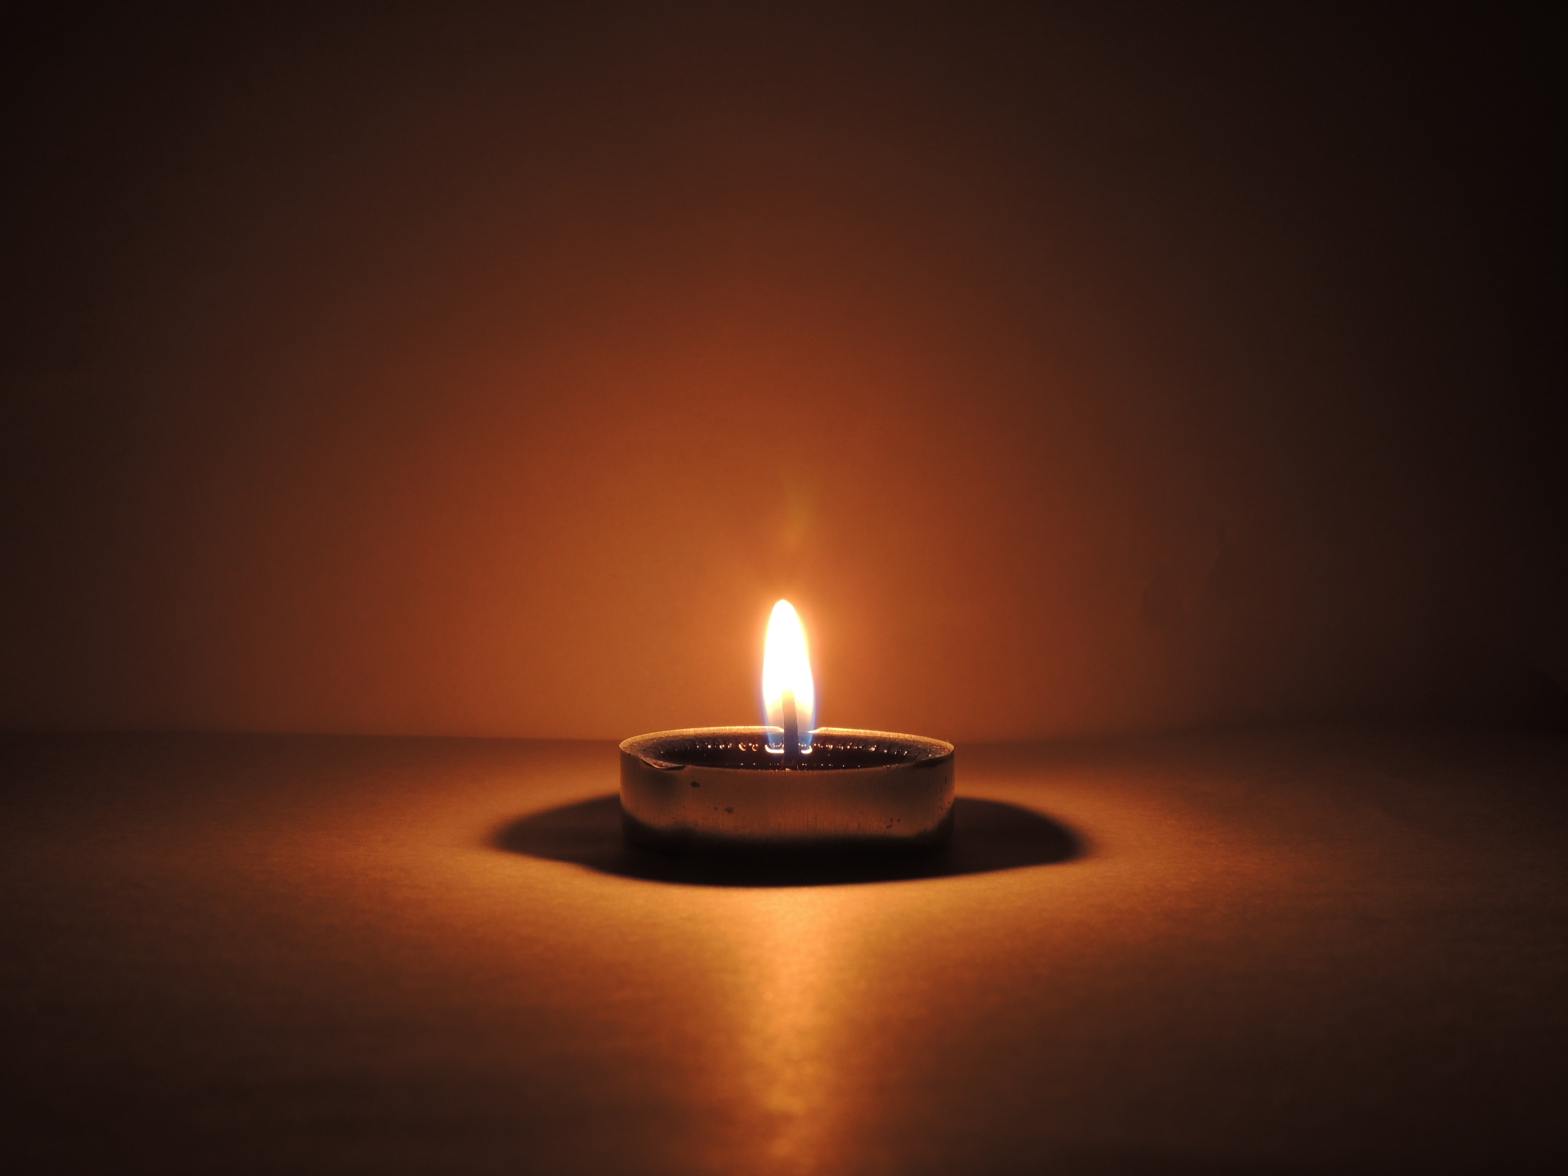 Candle burning in the dark, image by Chirag K